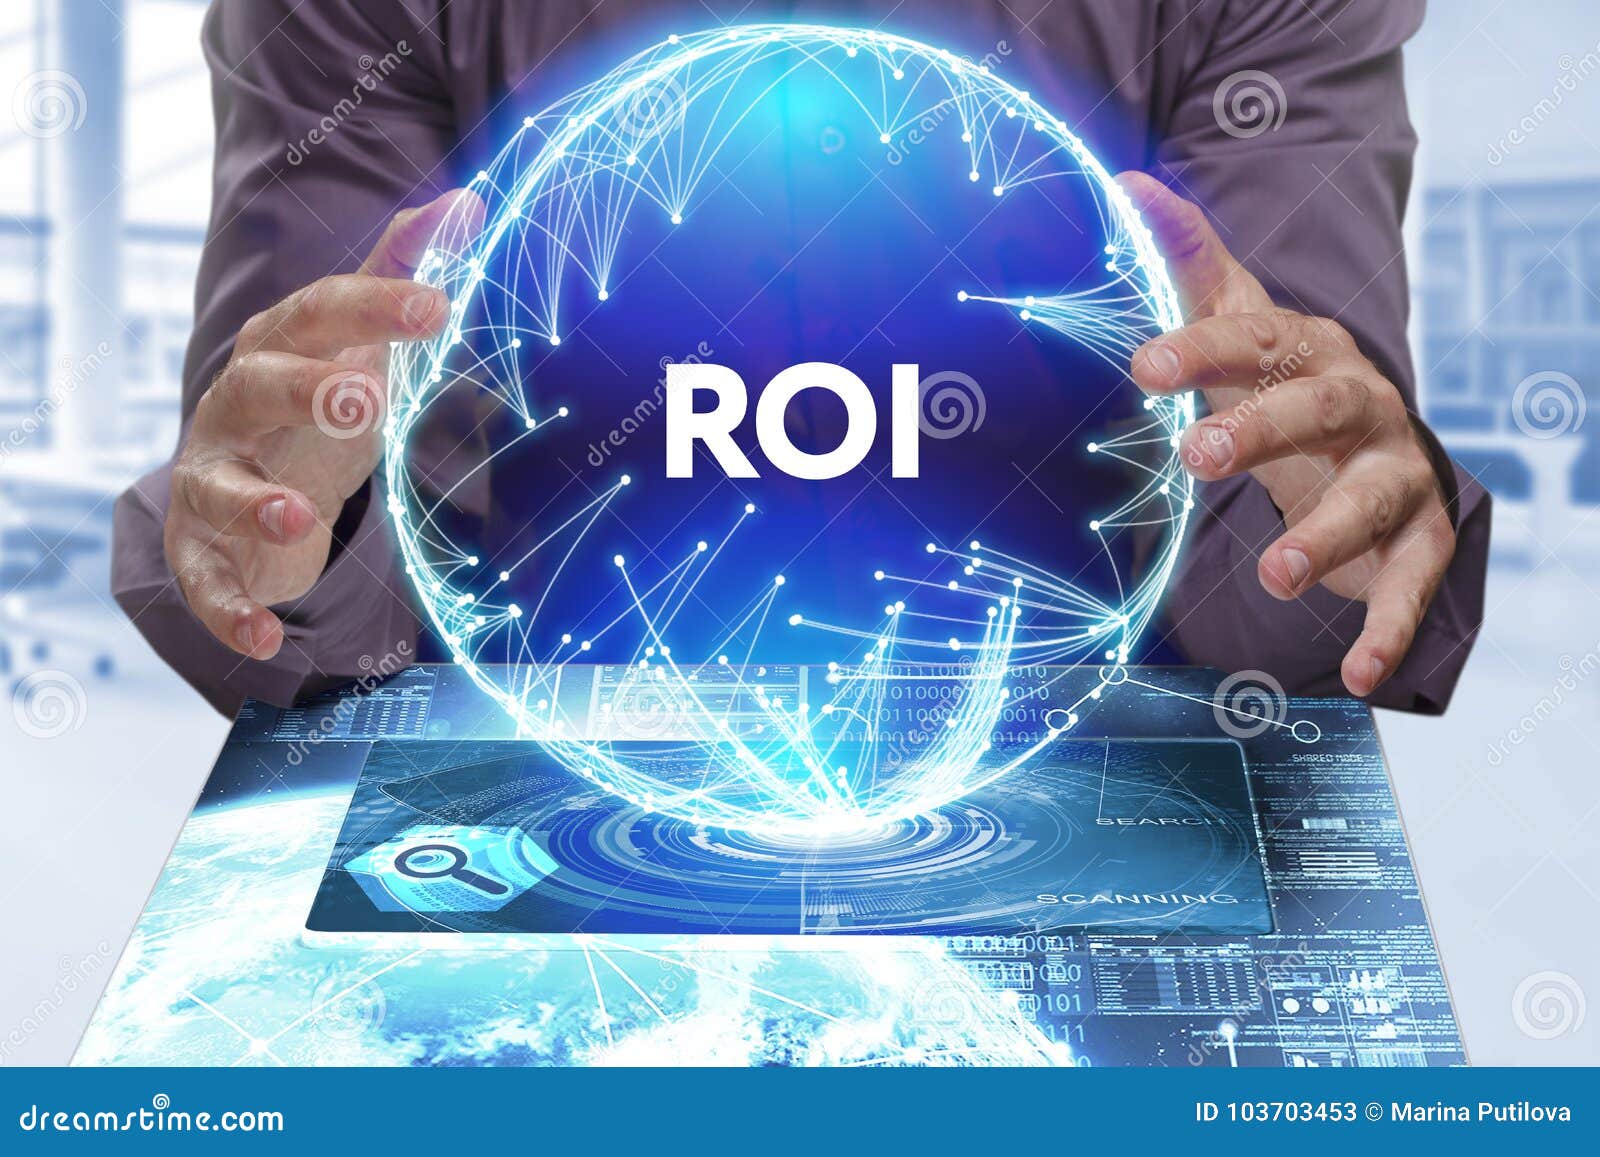 business, technology, internet and network concept. young businessman shows the word on the virtual display of the future: roi